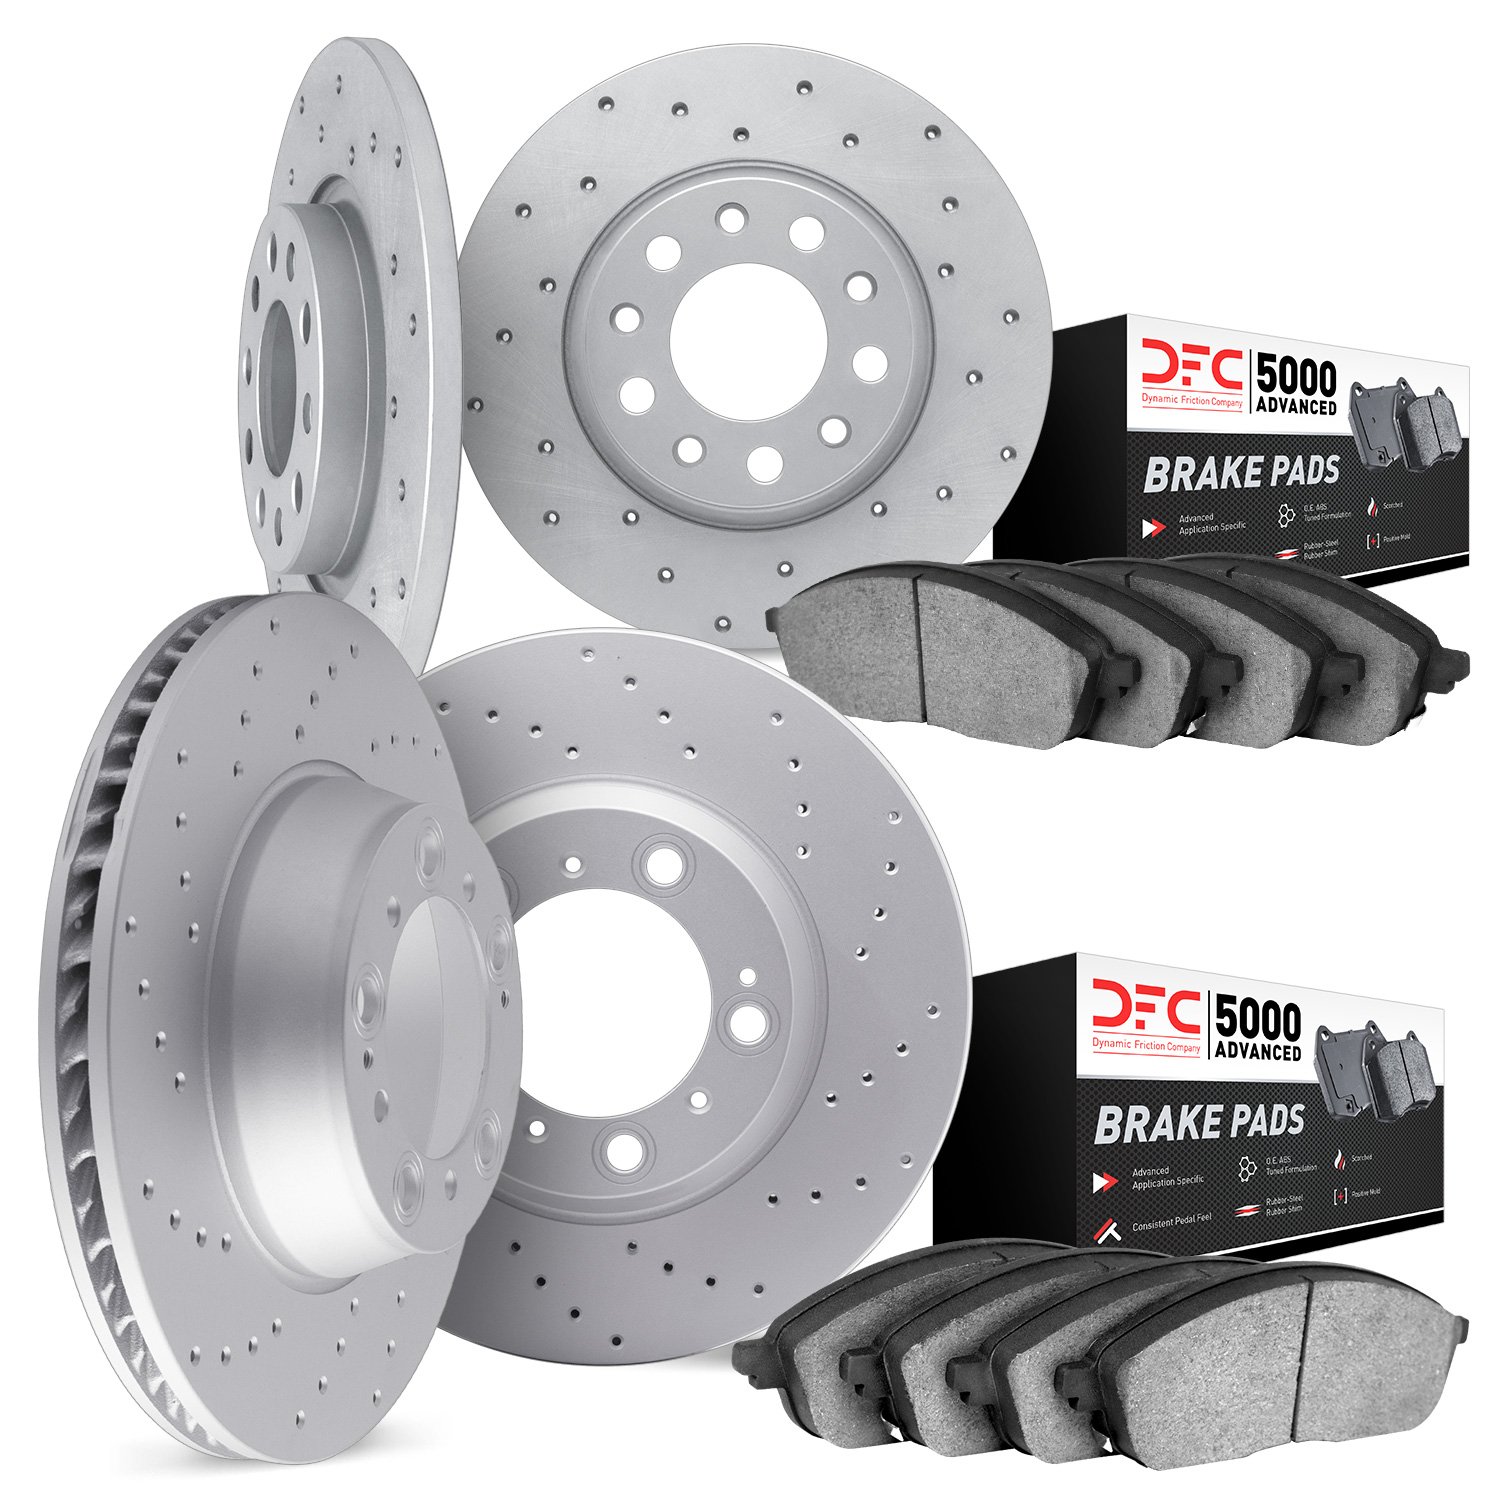 2704-80009 Geoperformance Drilled Brake Rotors with Active Performance Pads Kit, 2007-2013 Ford/Lincoln/Mercury/Mazda, Position: